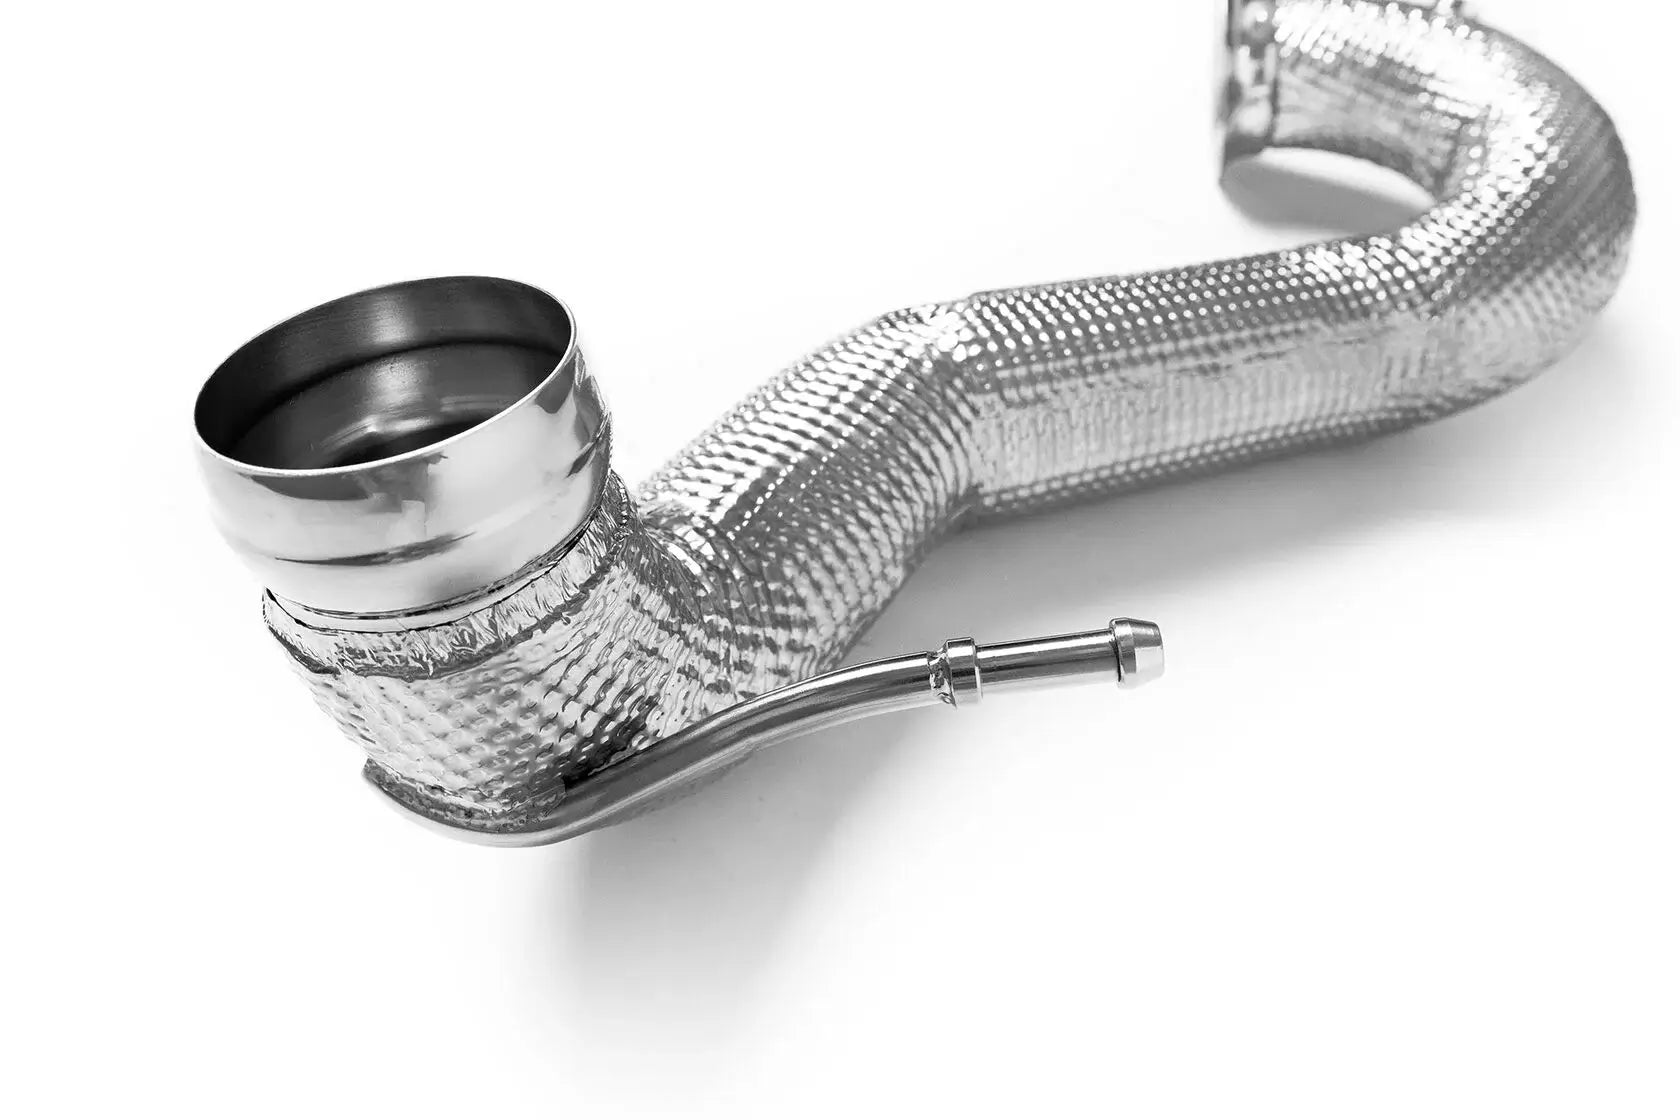 DEIKIN 10-MB.A45.W176-DP Downpipe for Mercedes-AMG A45 (w176) without HeatShield Photo-0 